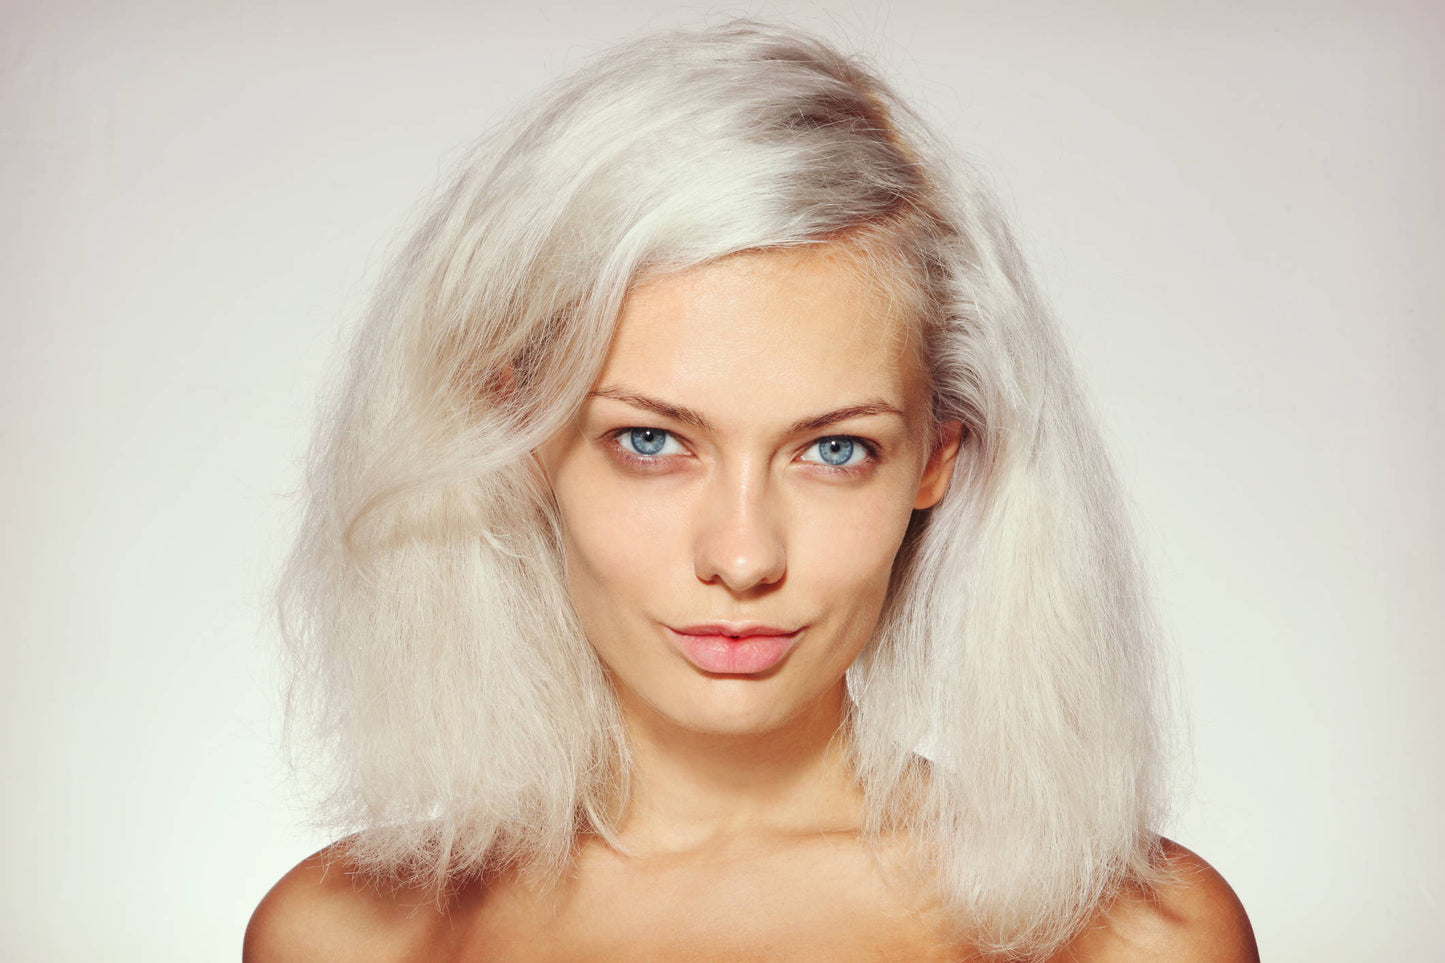 Does Bleaching Your Hair Make It Thin?